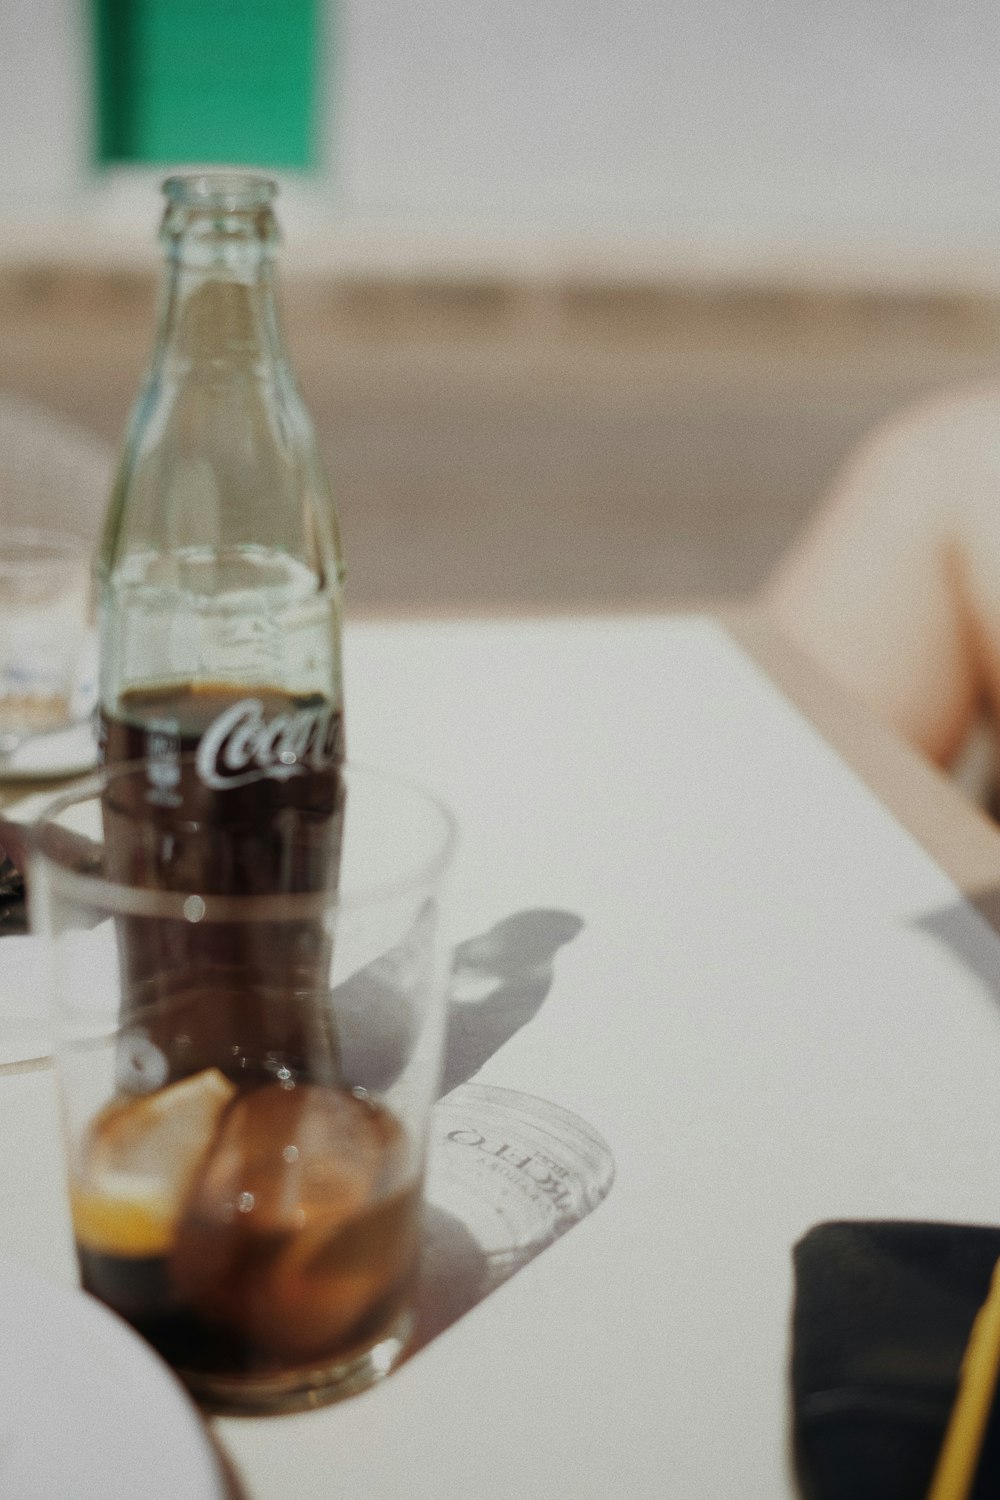 coca cola glass bottle on table